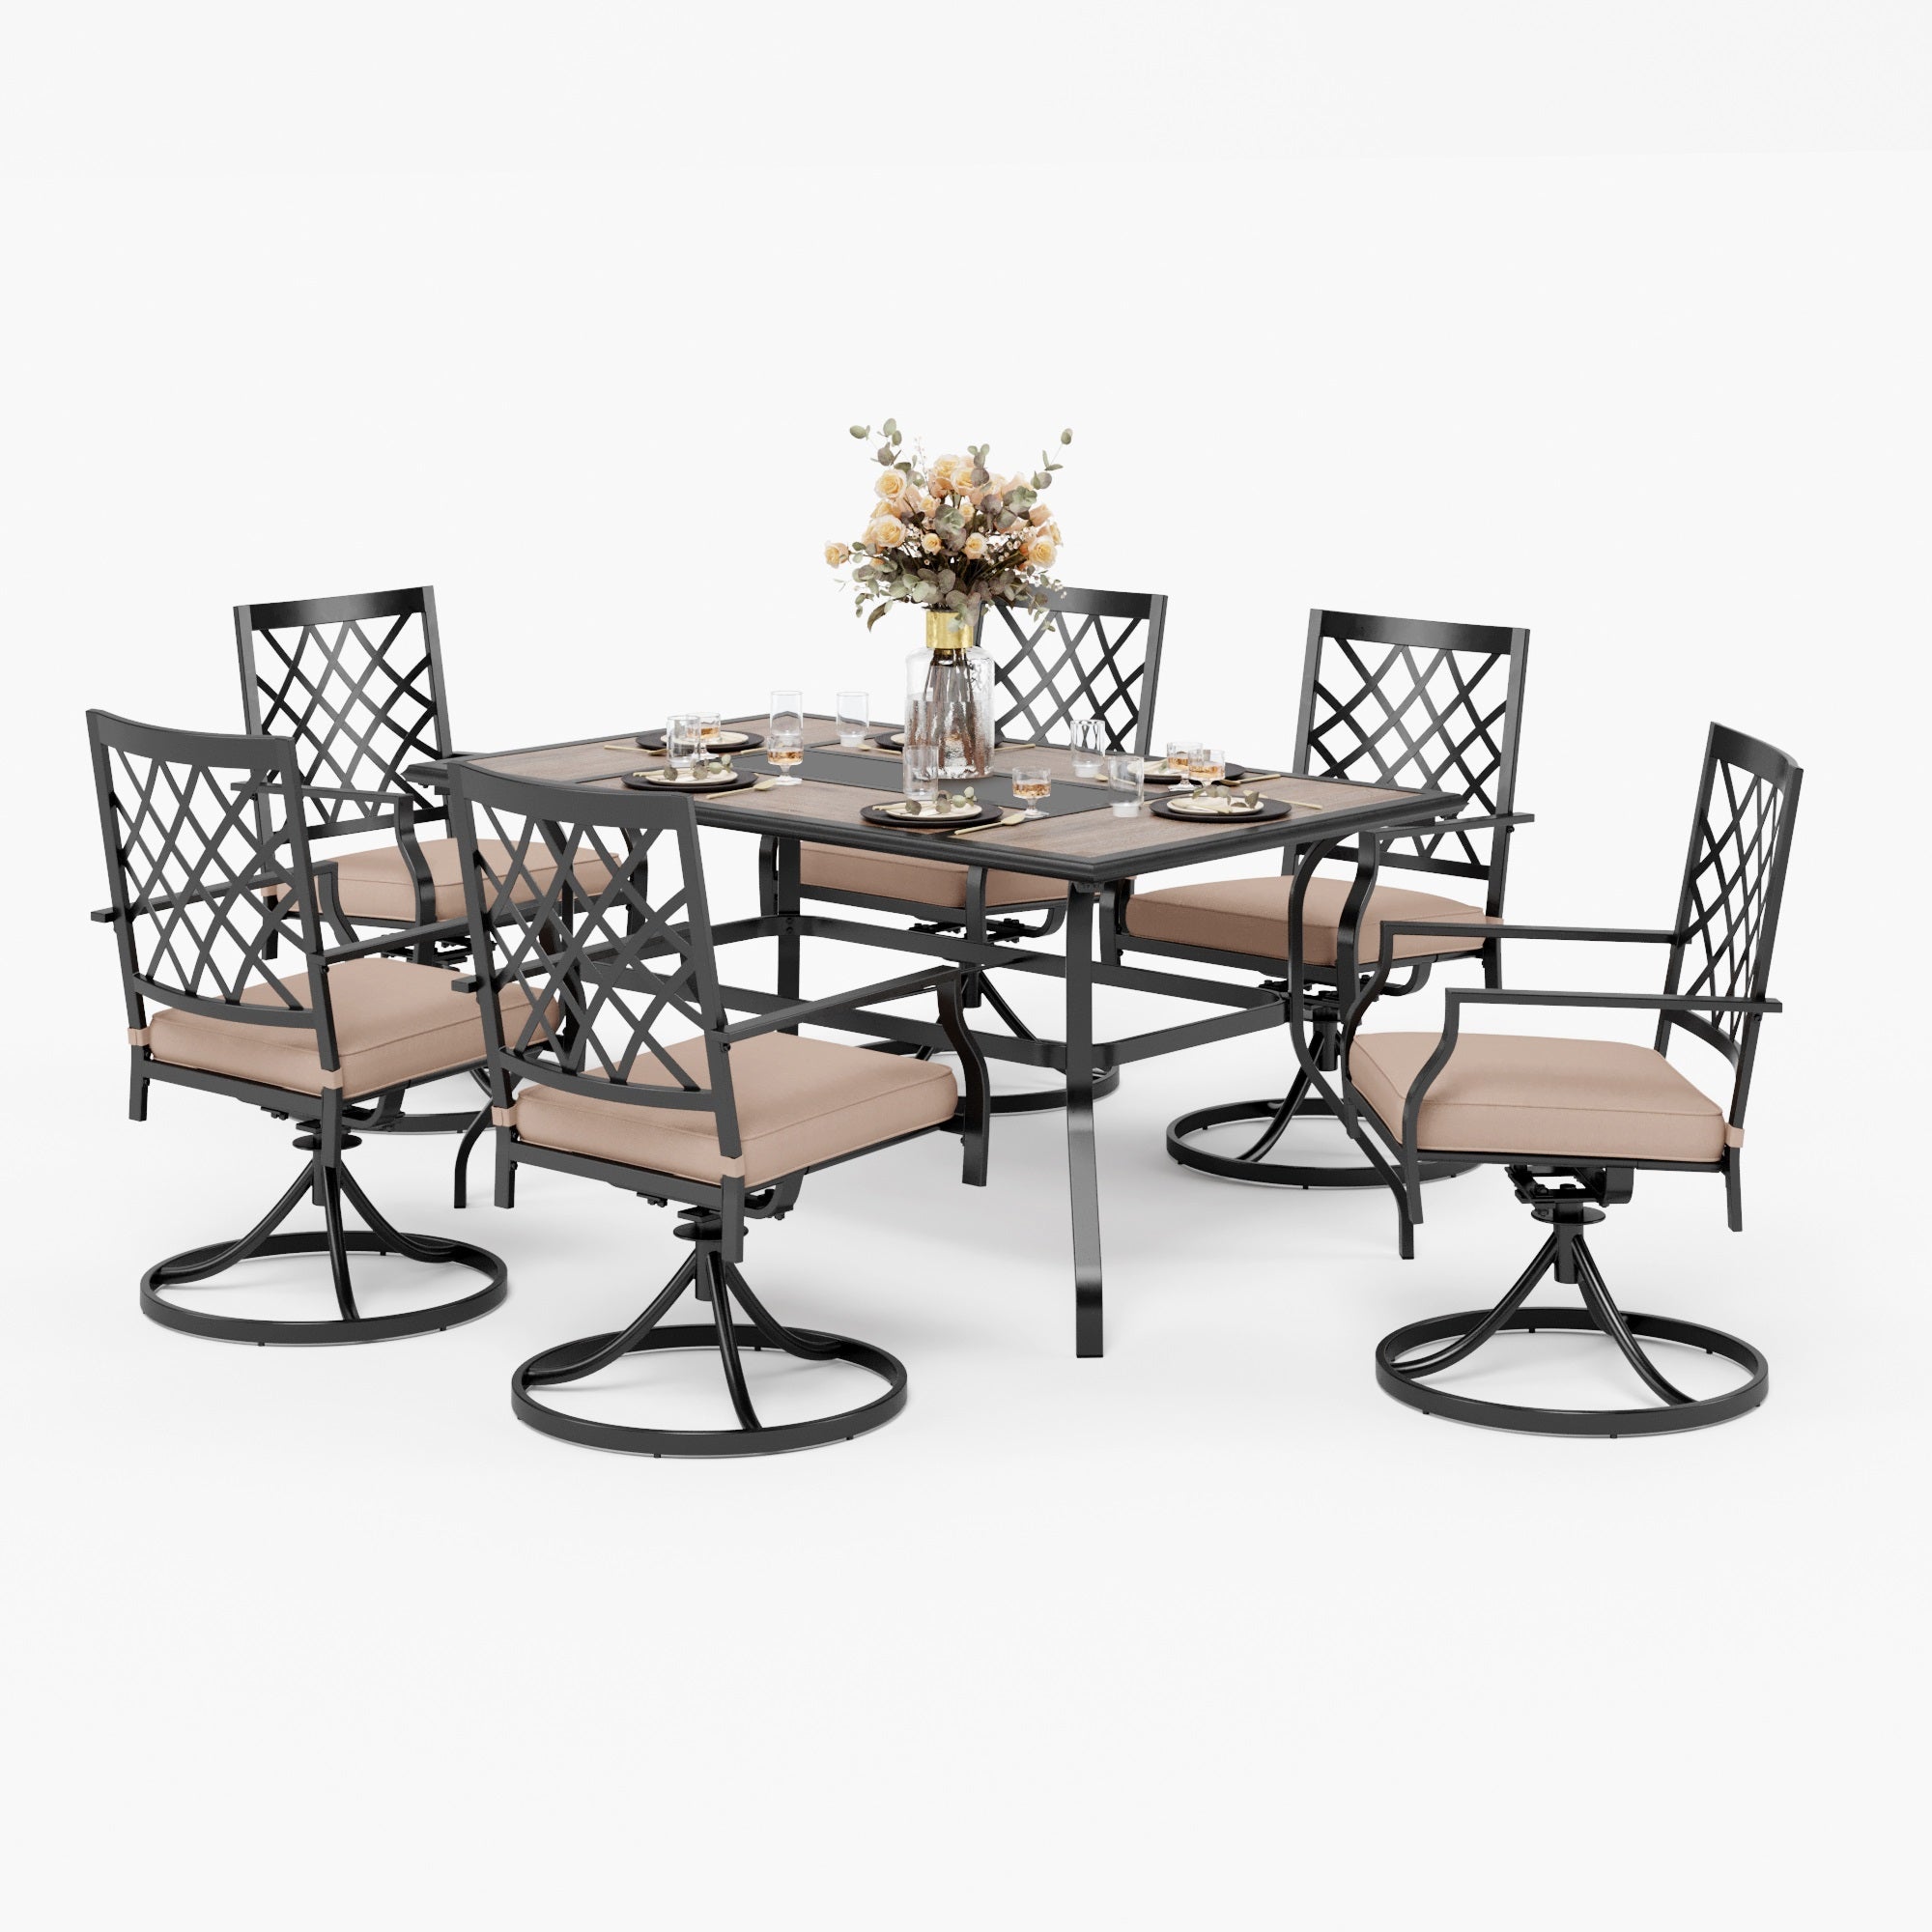 PHI VILLA Geometric Rectangle Table and Swivel Chairs 7-Piece Steel Outdoor Patio Dining Set